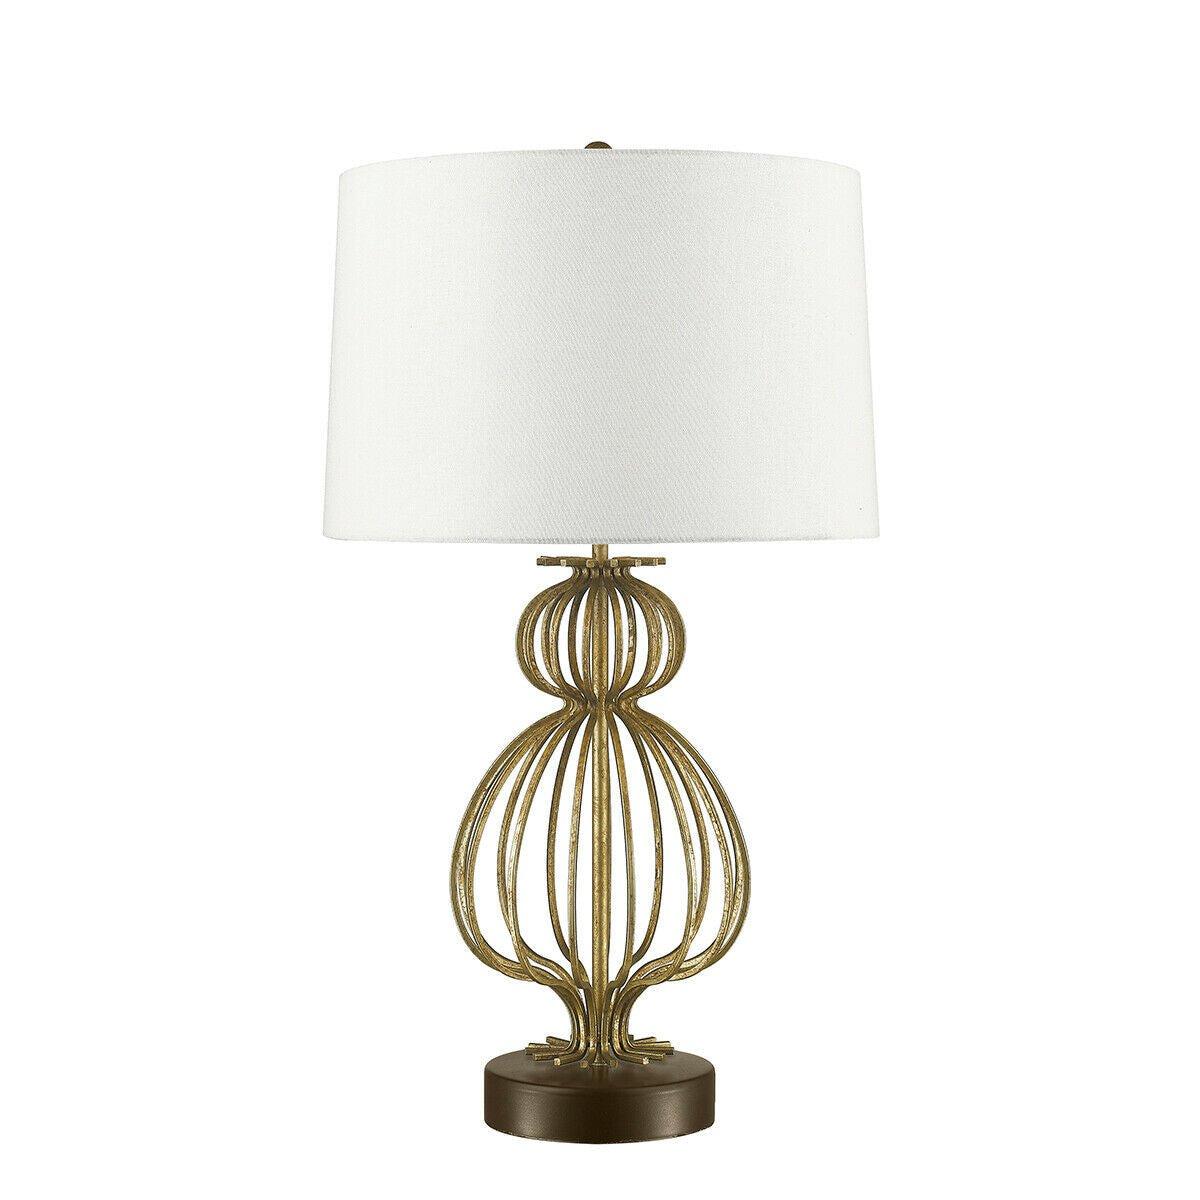 Table Lamp Mocha Brown Steel Base Cream Linen Shade Distressed Gold LED E27 100W